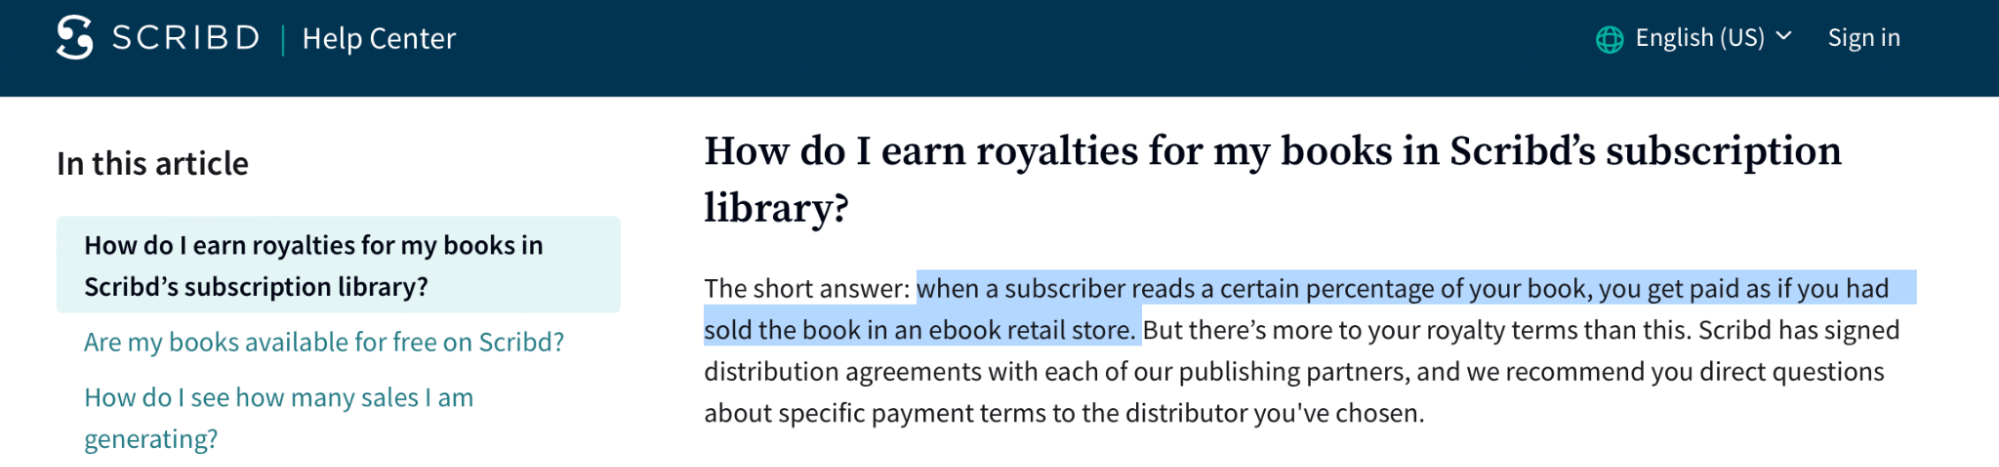 how does scribd pay the authors